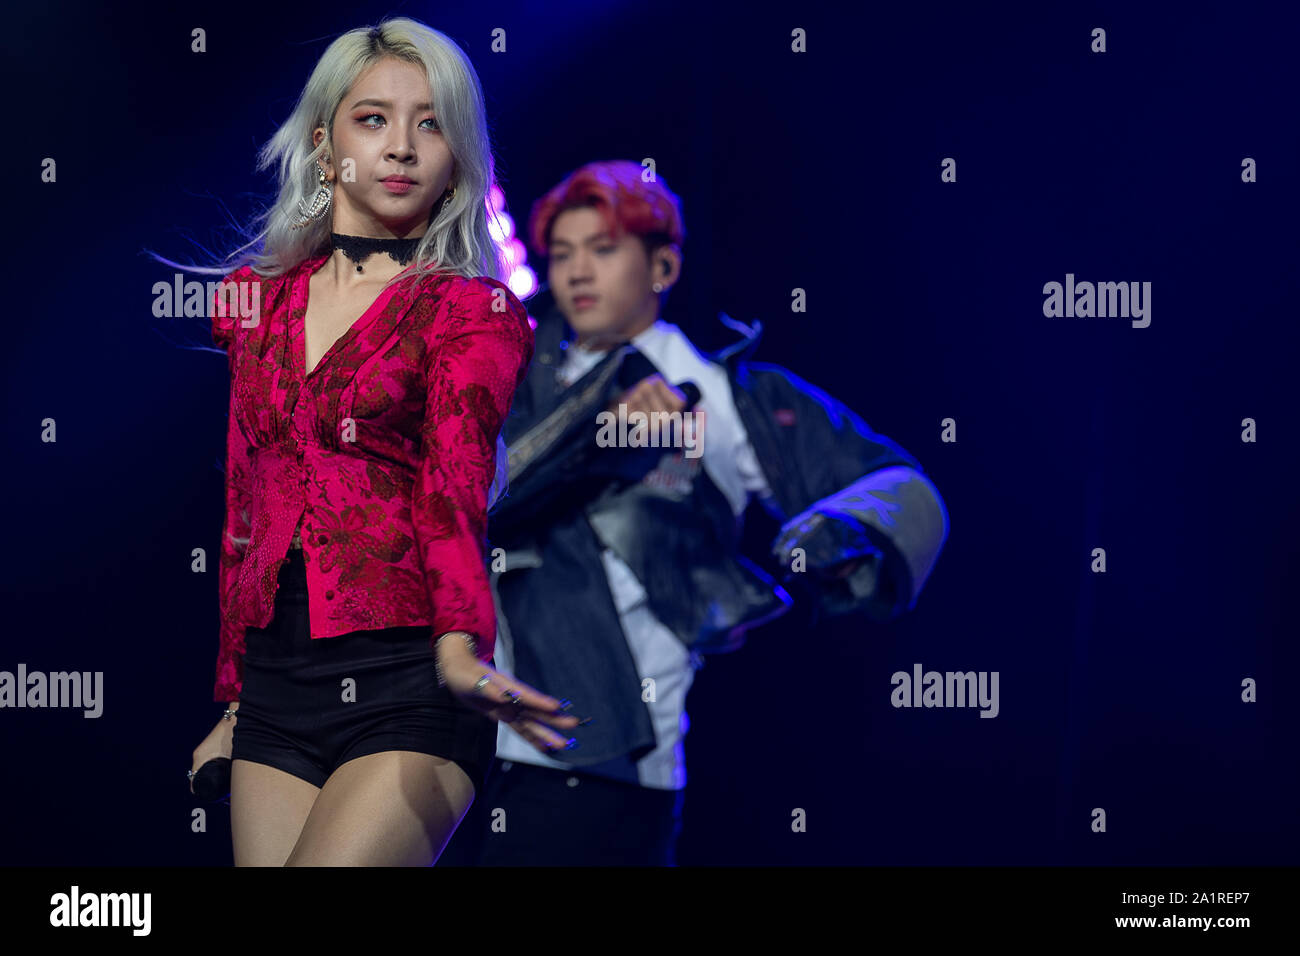 Mannheim, Germany. 28th Sep, 2019. The members of the band Kard, Jiwoo and  BM perform during the K-Pop-Festival "Finger Heart Festival".  Korean-language pop music is also celebrating success outside Asia. Girl and